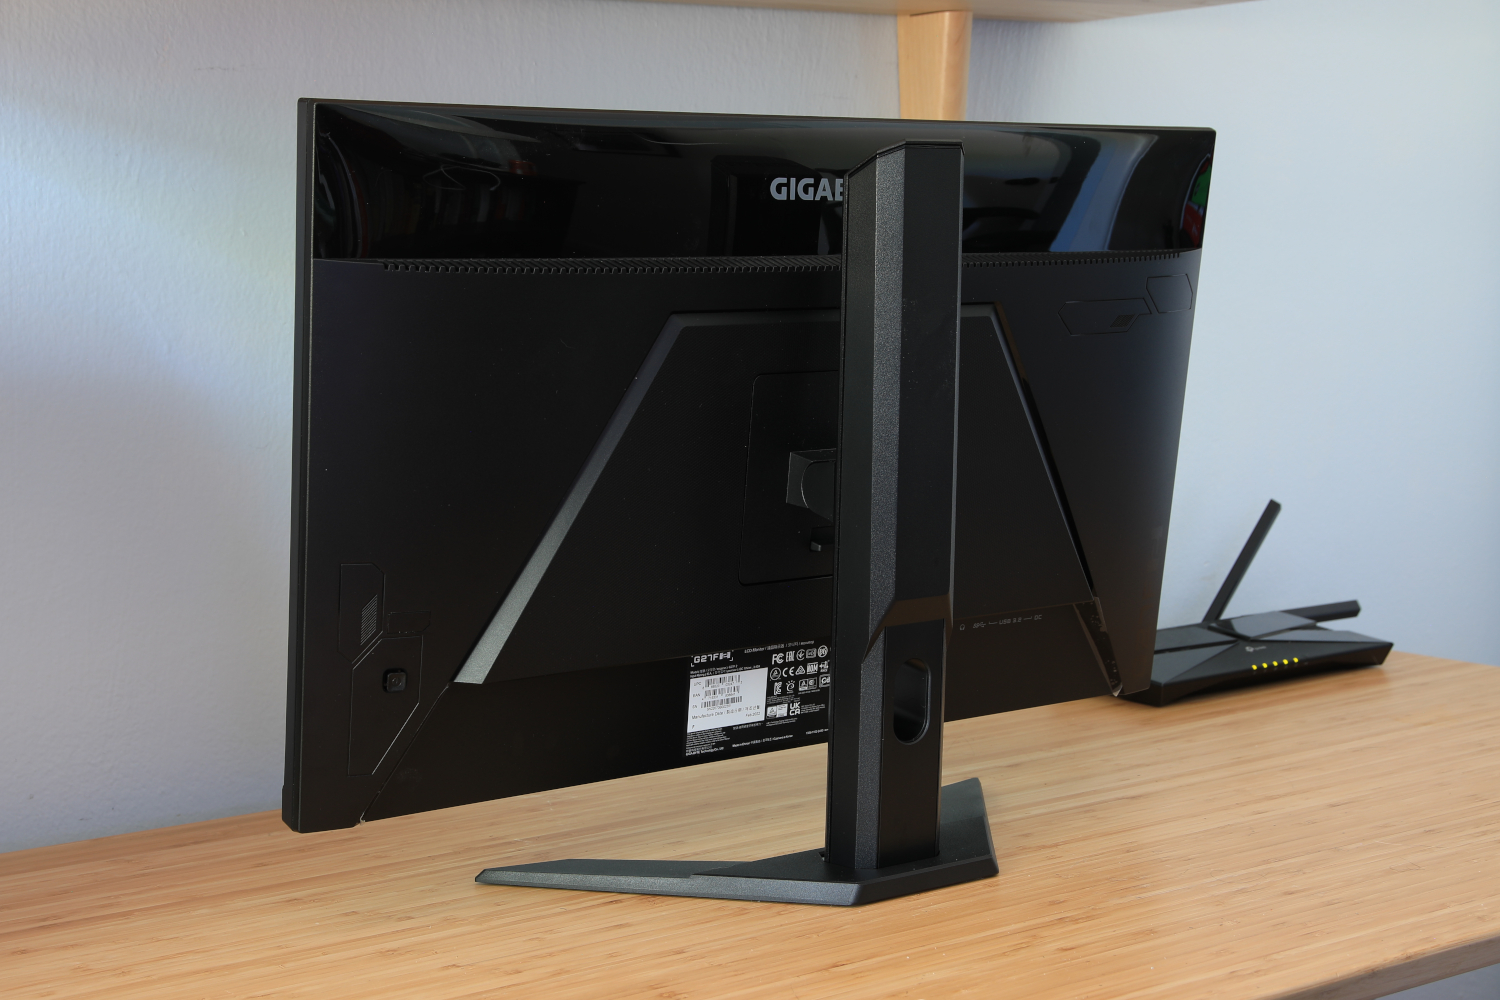 Gigabyte G27F 2 monitor review: It's all about affordable speed